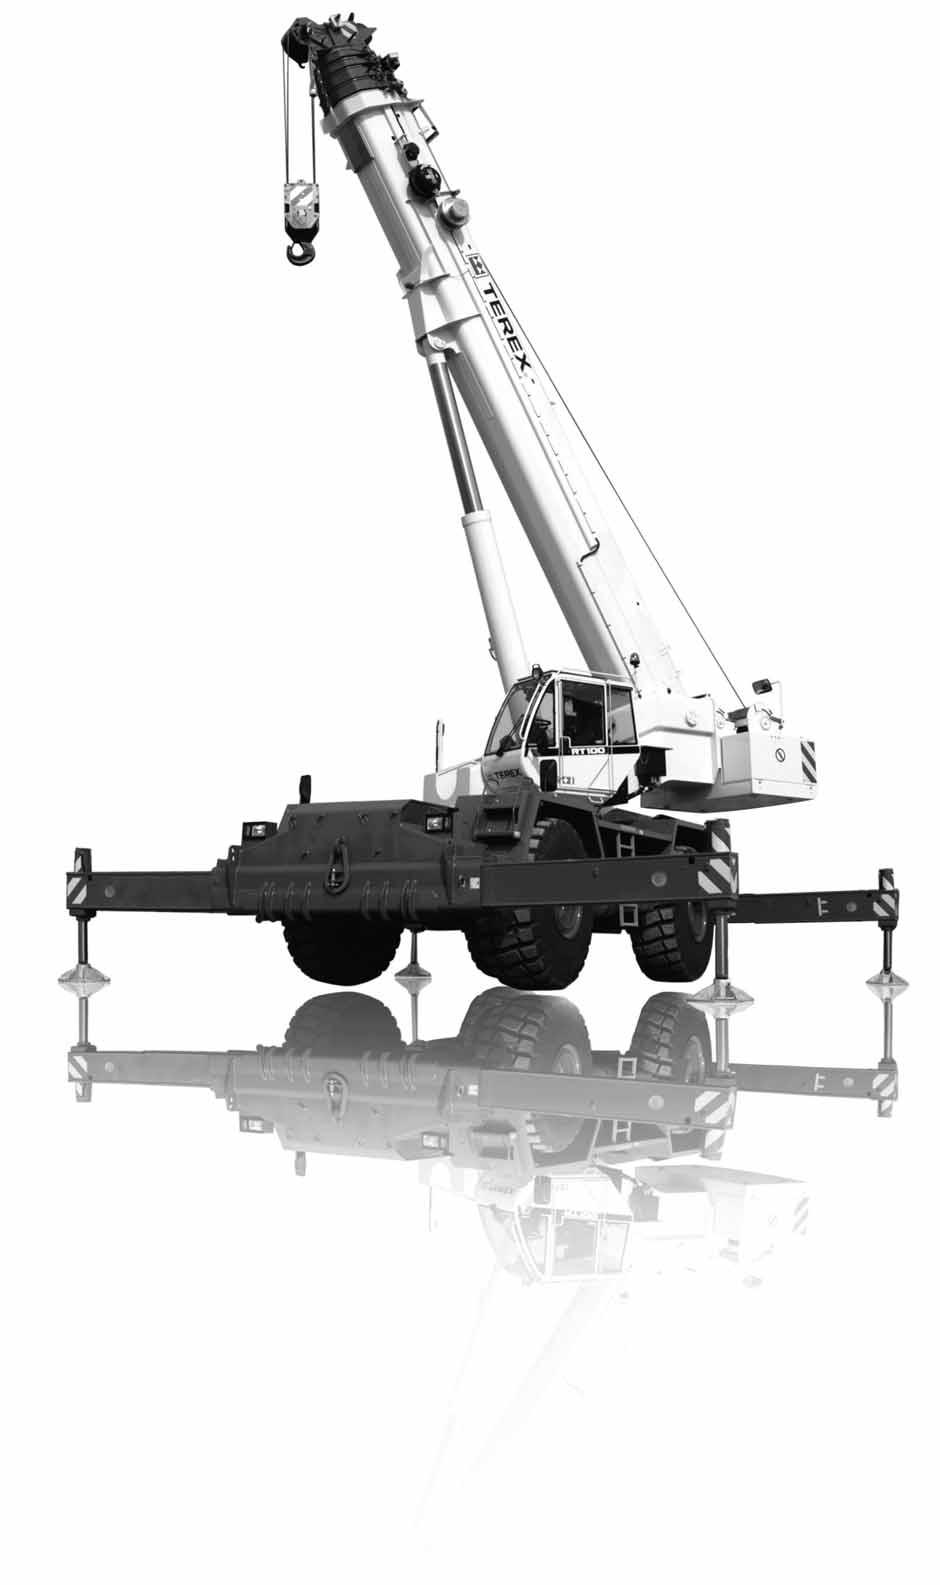 ROUGH TERRAIN CRANE DATASHEET - IMPERIAL Features: Rated capacity: 100 ton @ 10 ft working